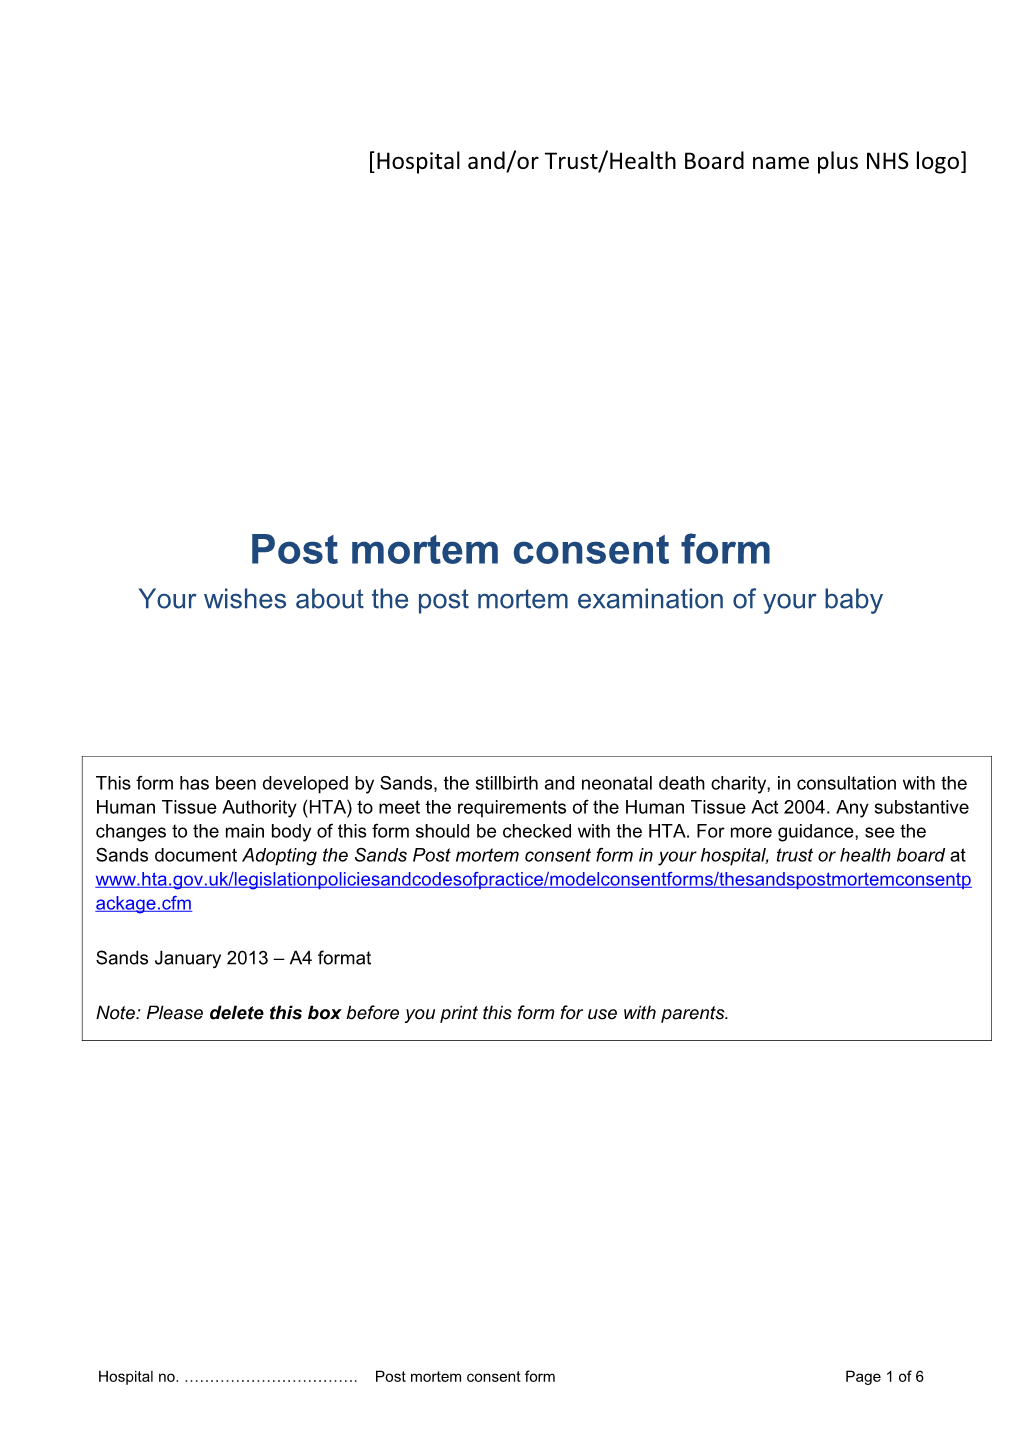 PM Consent Form 31 11 11 FINAL Version to Proofread